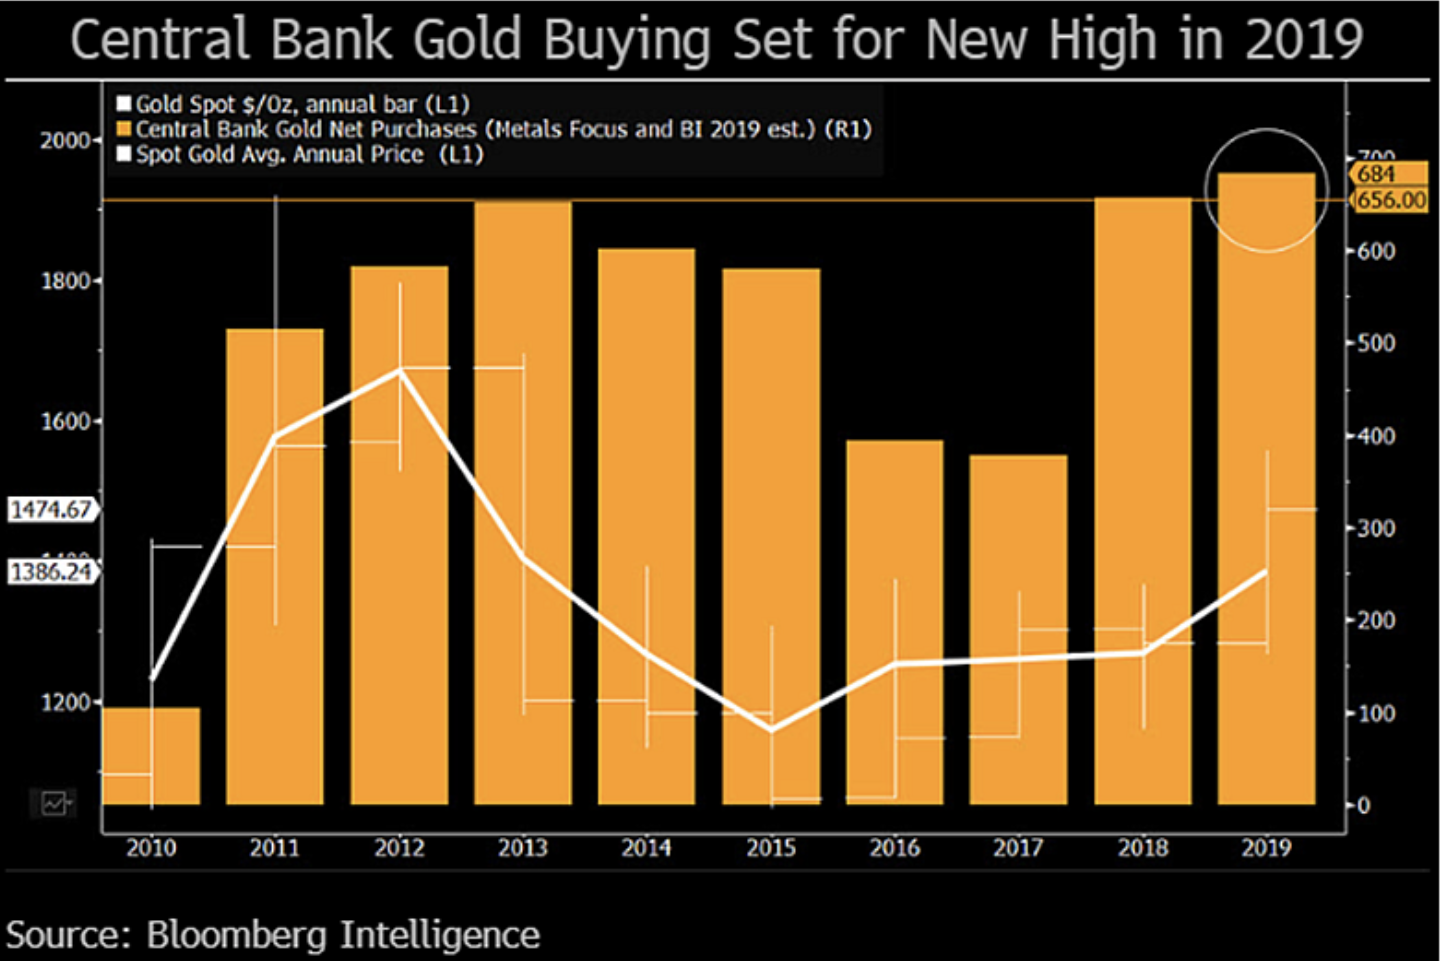 Central banks buying gold